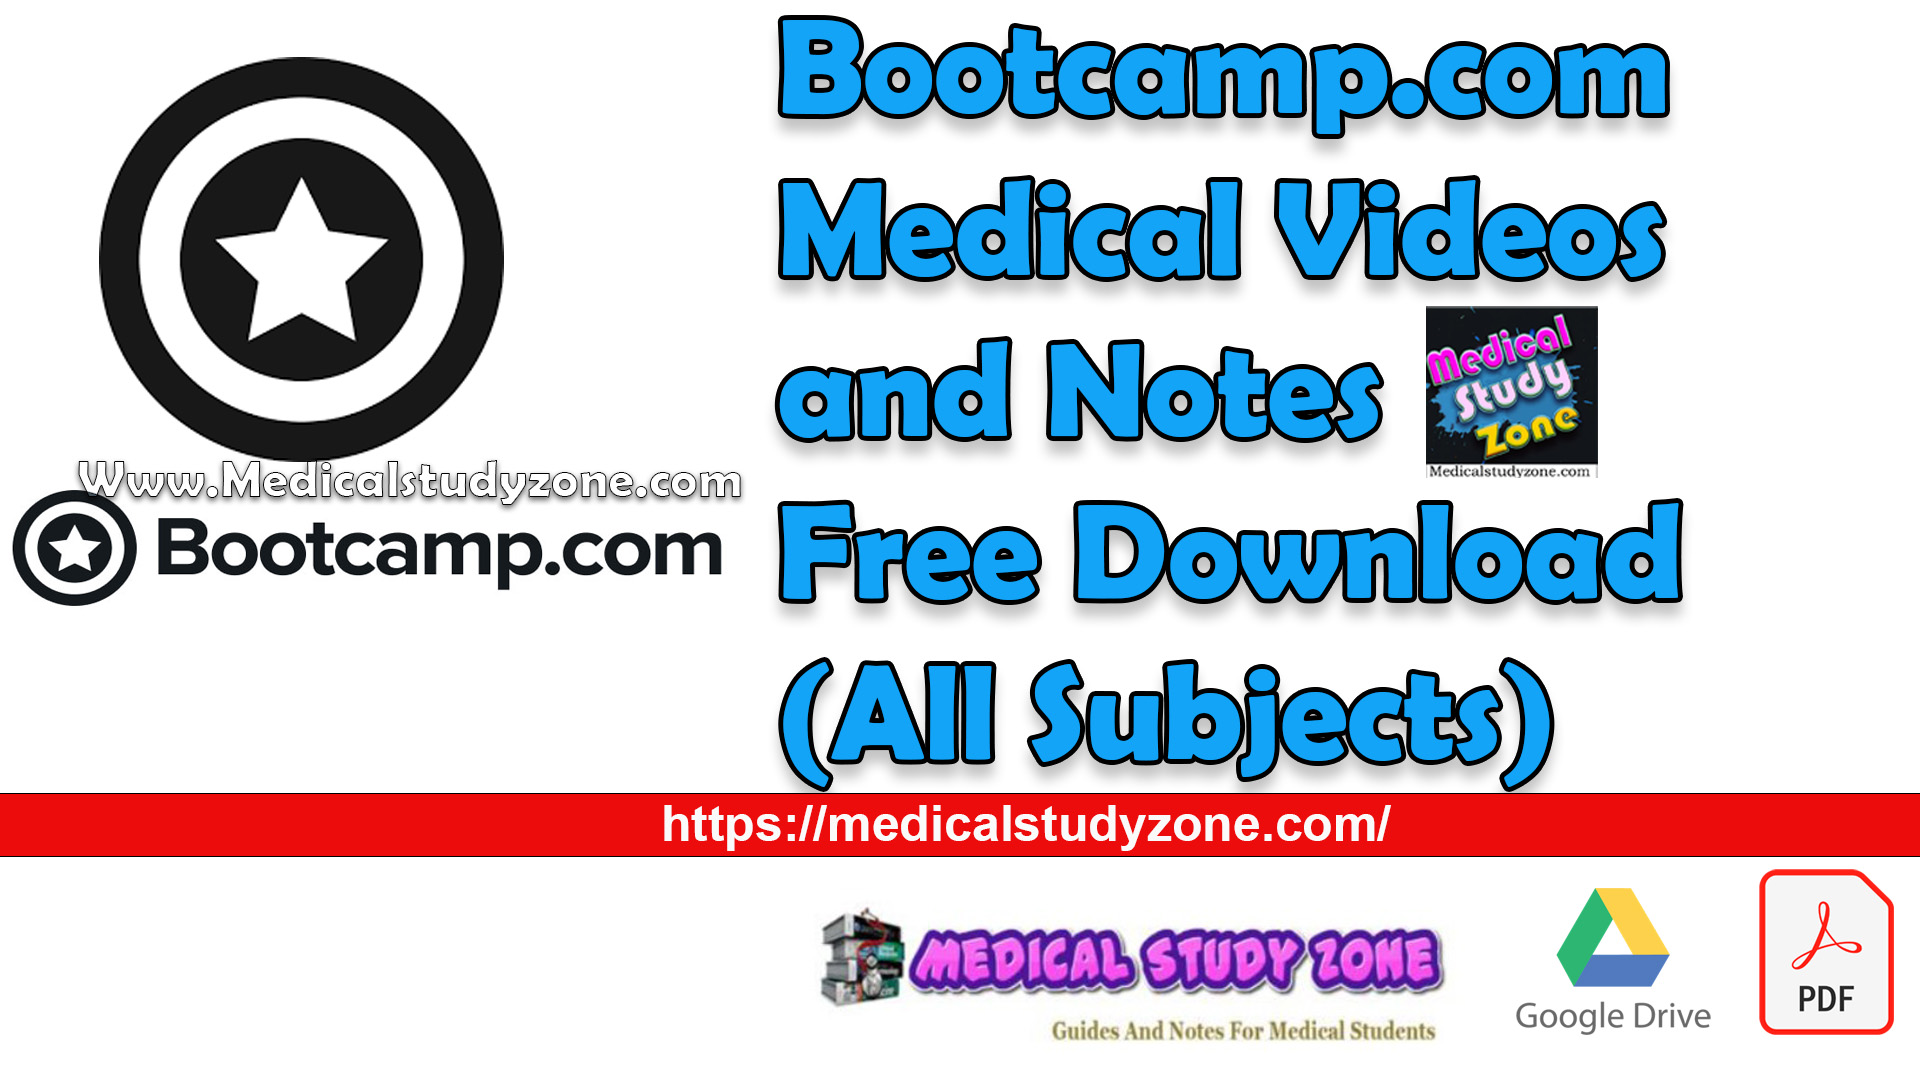 Bootcamp.com Medical Videos and Notes 2023 Free Download (All Subjects)